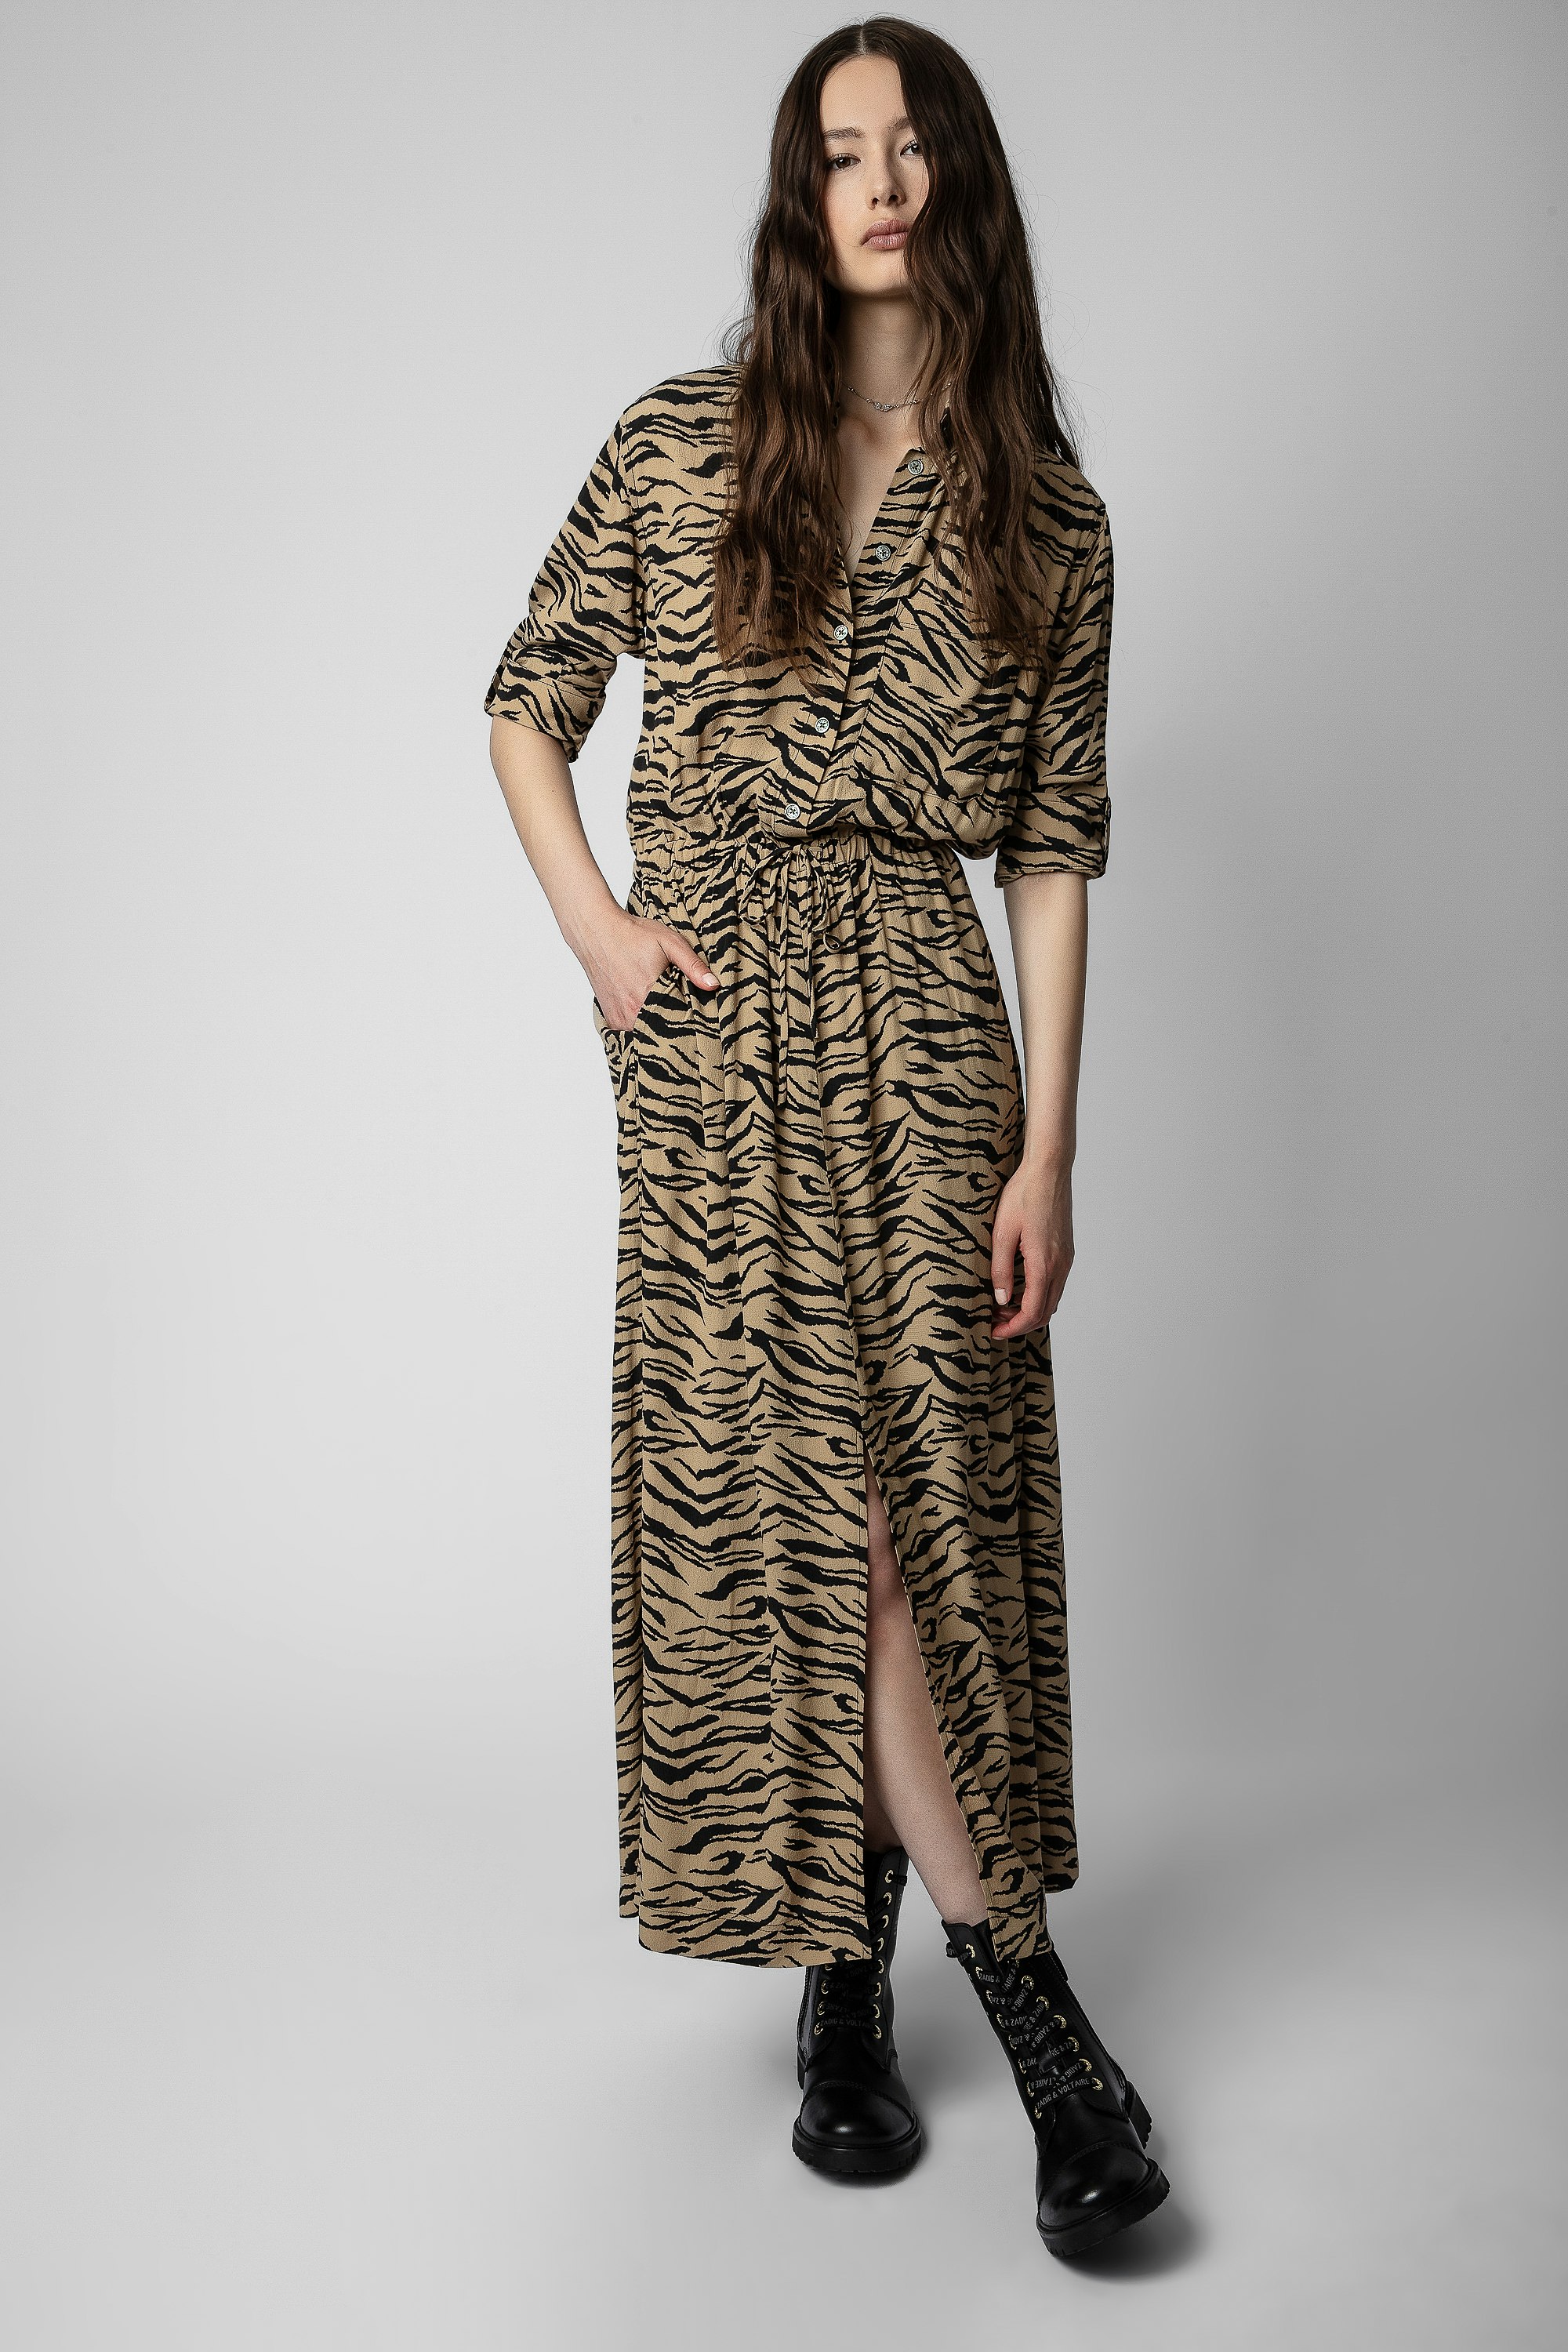 Radial Tiger Dress - Women's long-sleeved maxi dress with tiger print